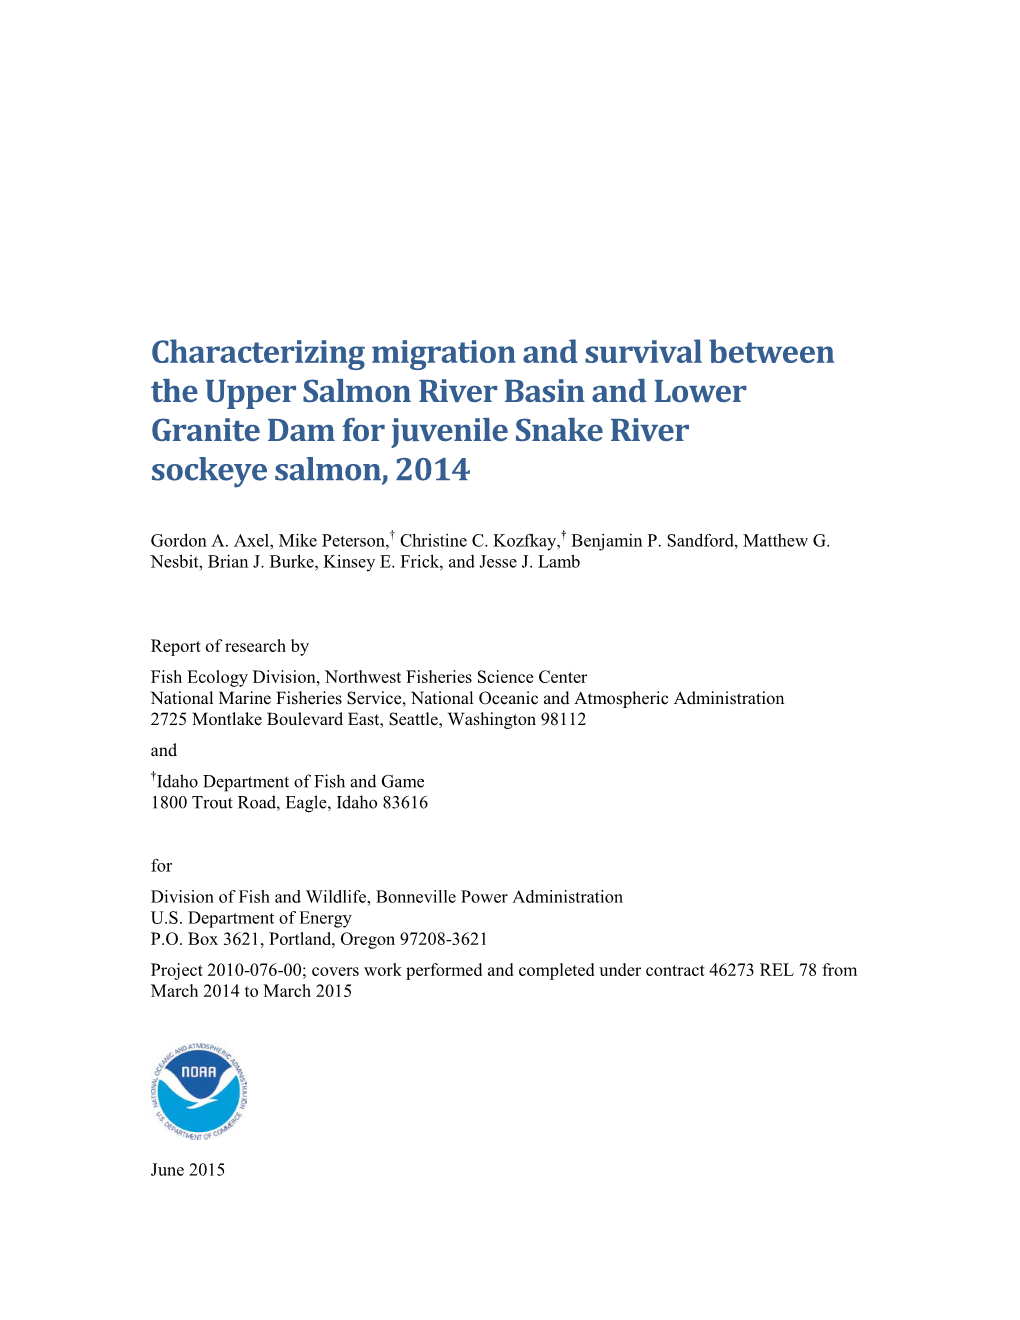 Characterizing Migration and Survival Between the Upper Salmon River Basin and Lower Granite Dam for Juvenile Snake River Sockeye Salmon, 2014